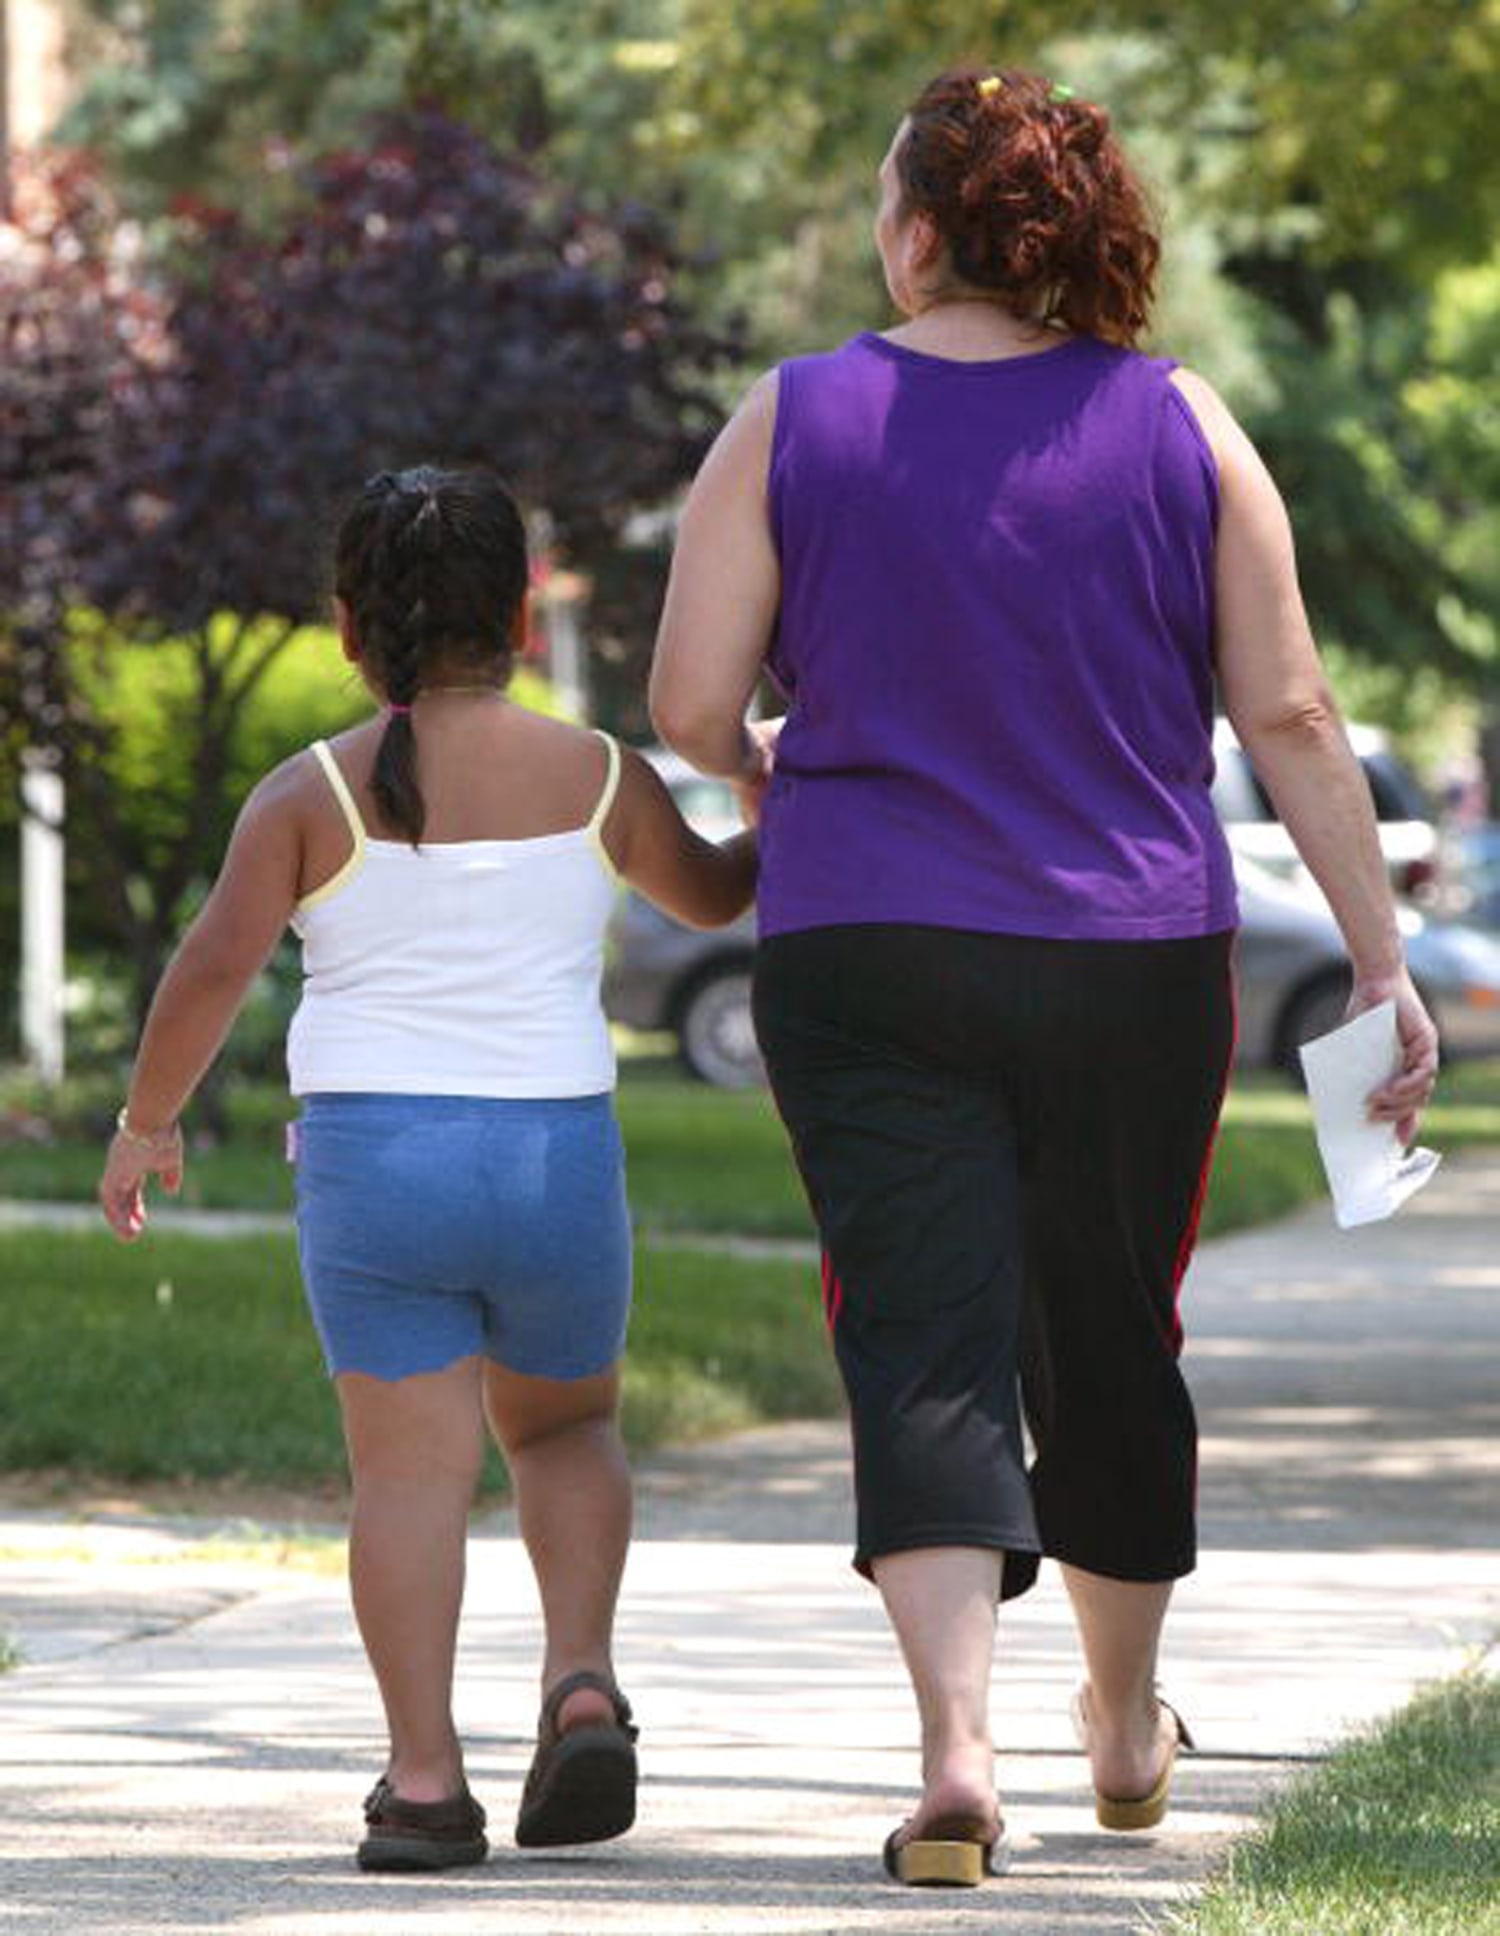 Obesity linked to early puberty in